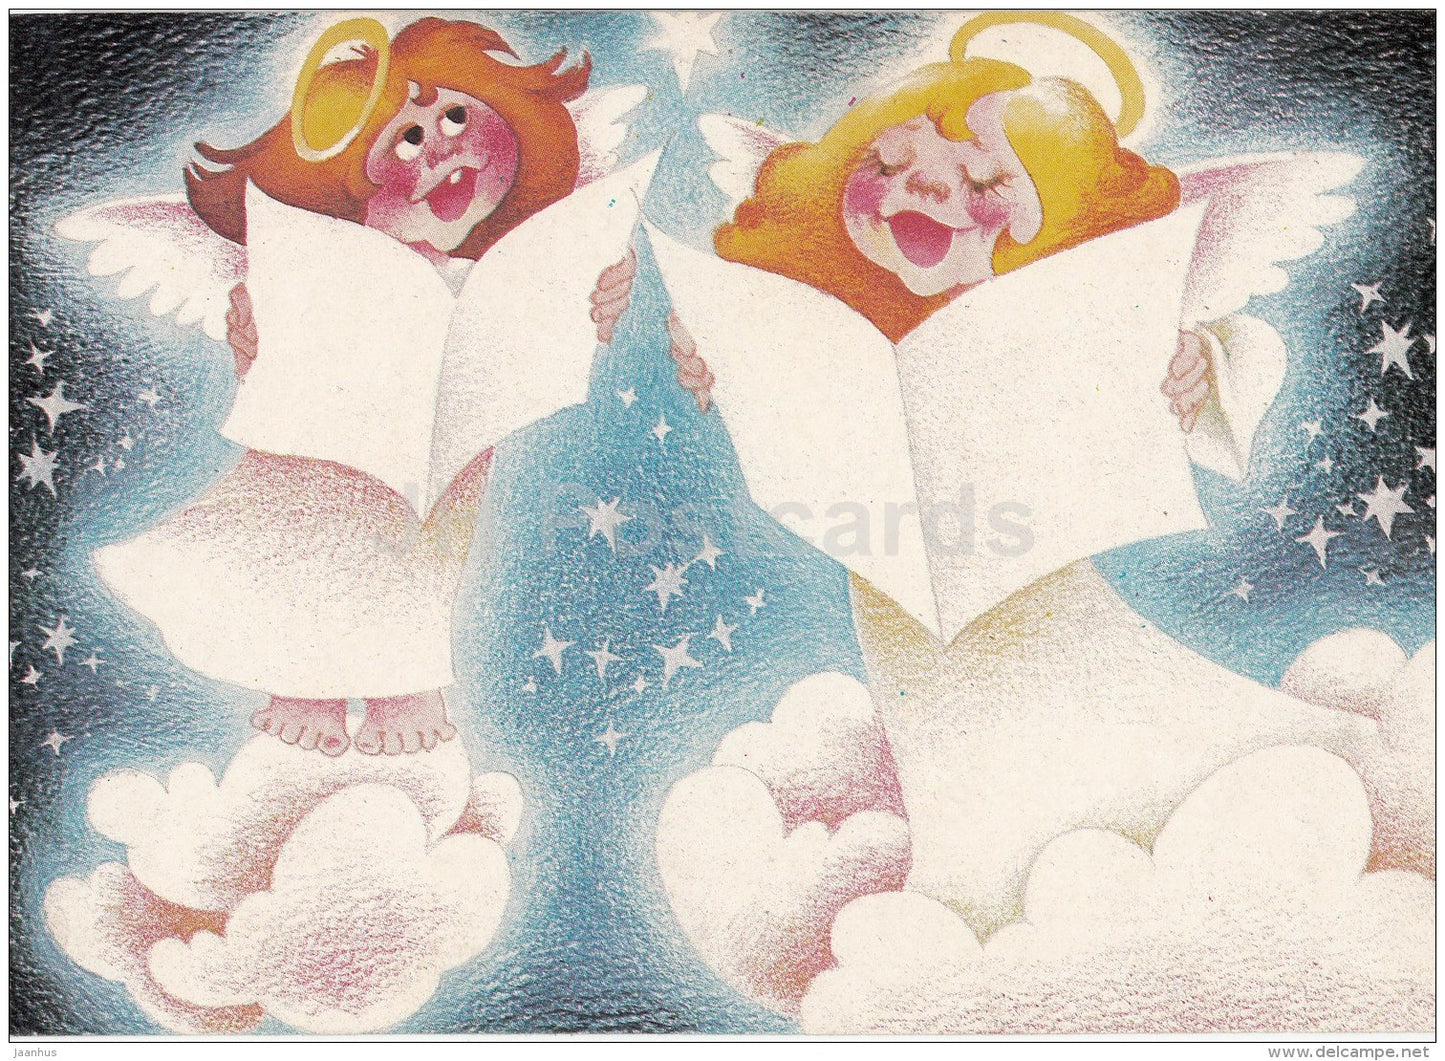 New Year Greeting card - Angels - illustration - 1980s - Estonia USSR - used - JH Postcards